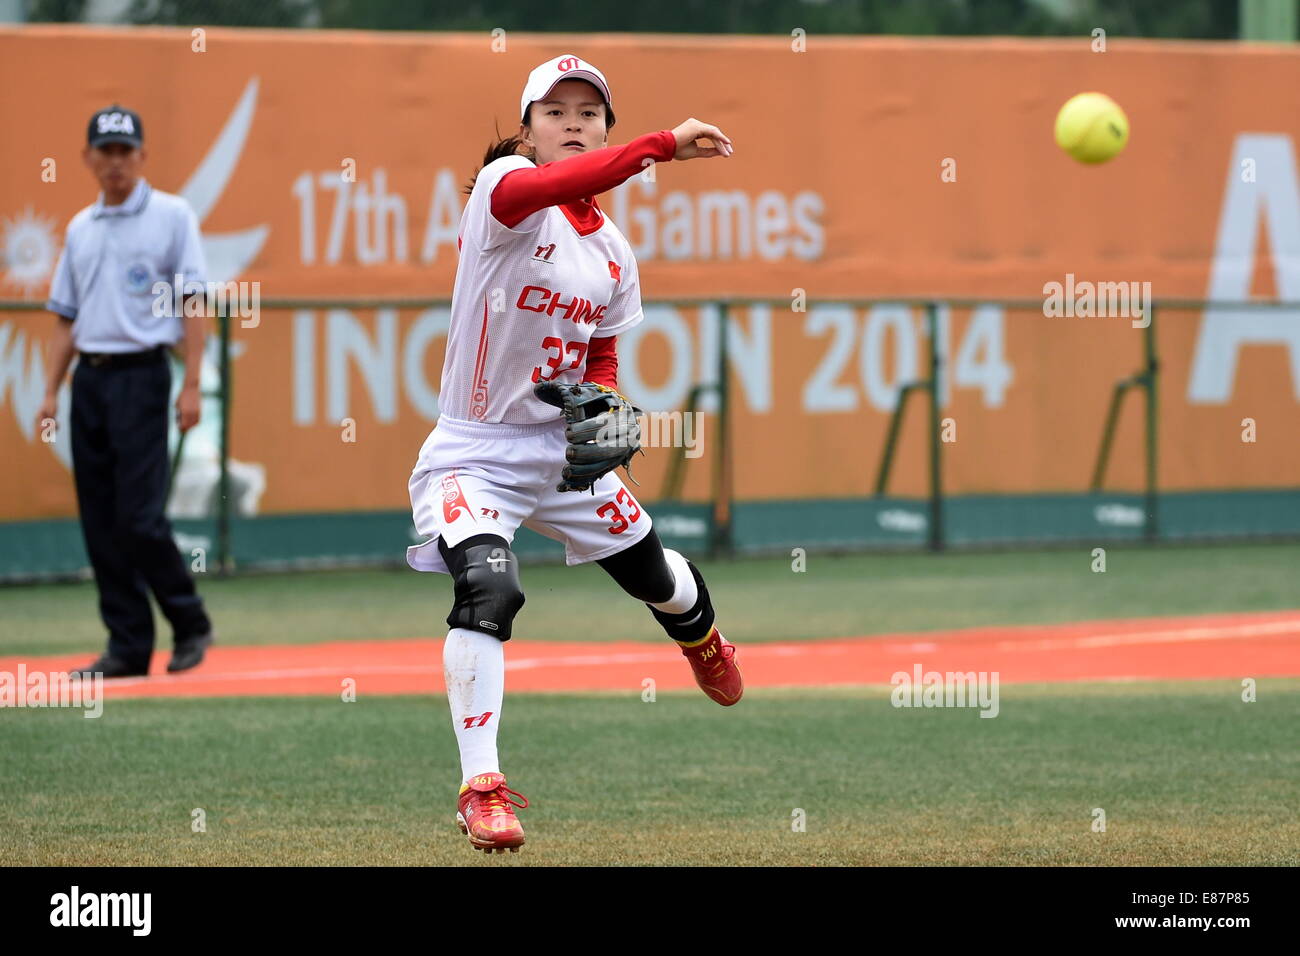 Incheon, South Korea. 2nd Oct, 2014. Li Huan of China throws the ball during the women's softball final against Chinese Taipei at the 17th Asian Games in Incheon, South Korea, Oct. 2, 2014. China lost 3-4 and got the bronze medal. © Gao Jianjun/Xinhua/Alamy Live News Stock Photo